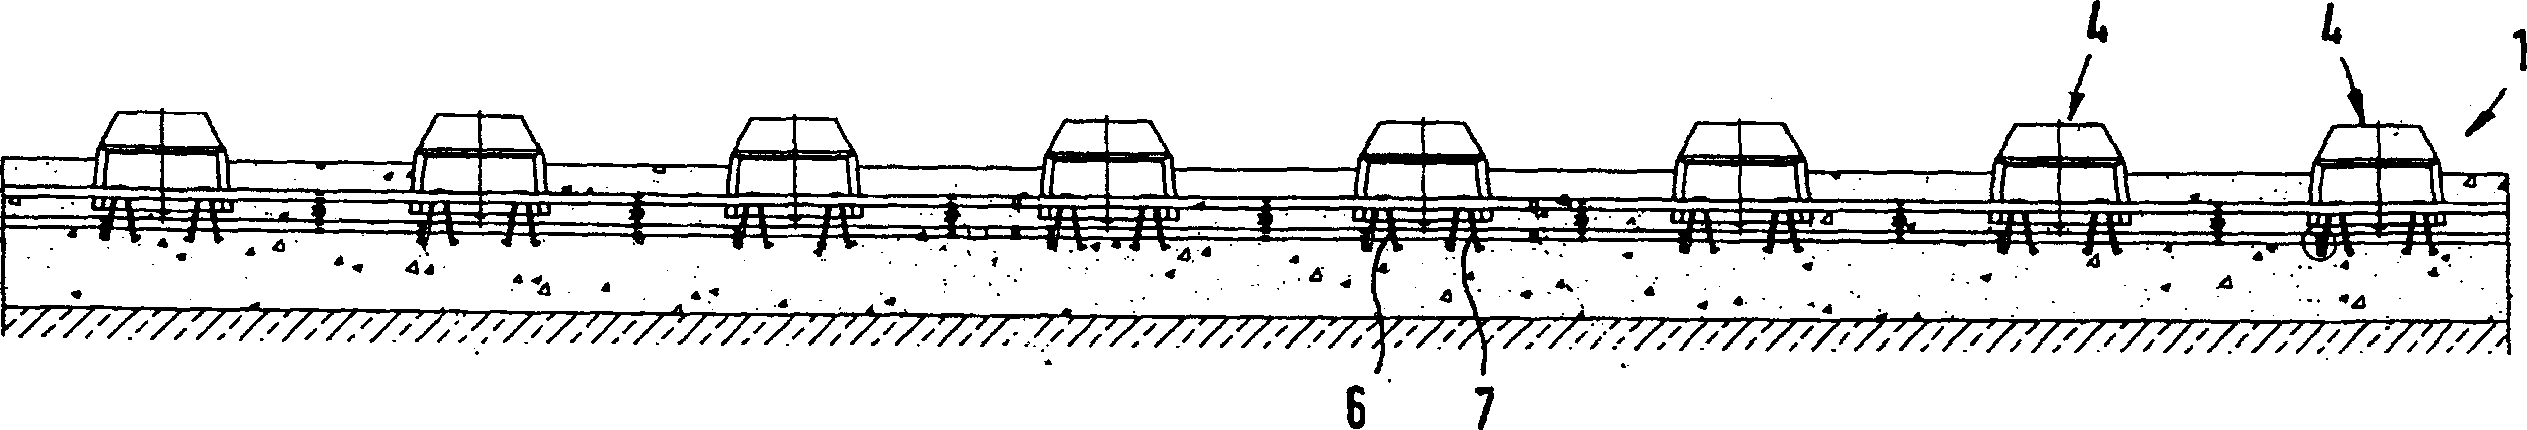 Fixed carriageway for rail vehicles and method of manufacturing the same